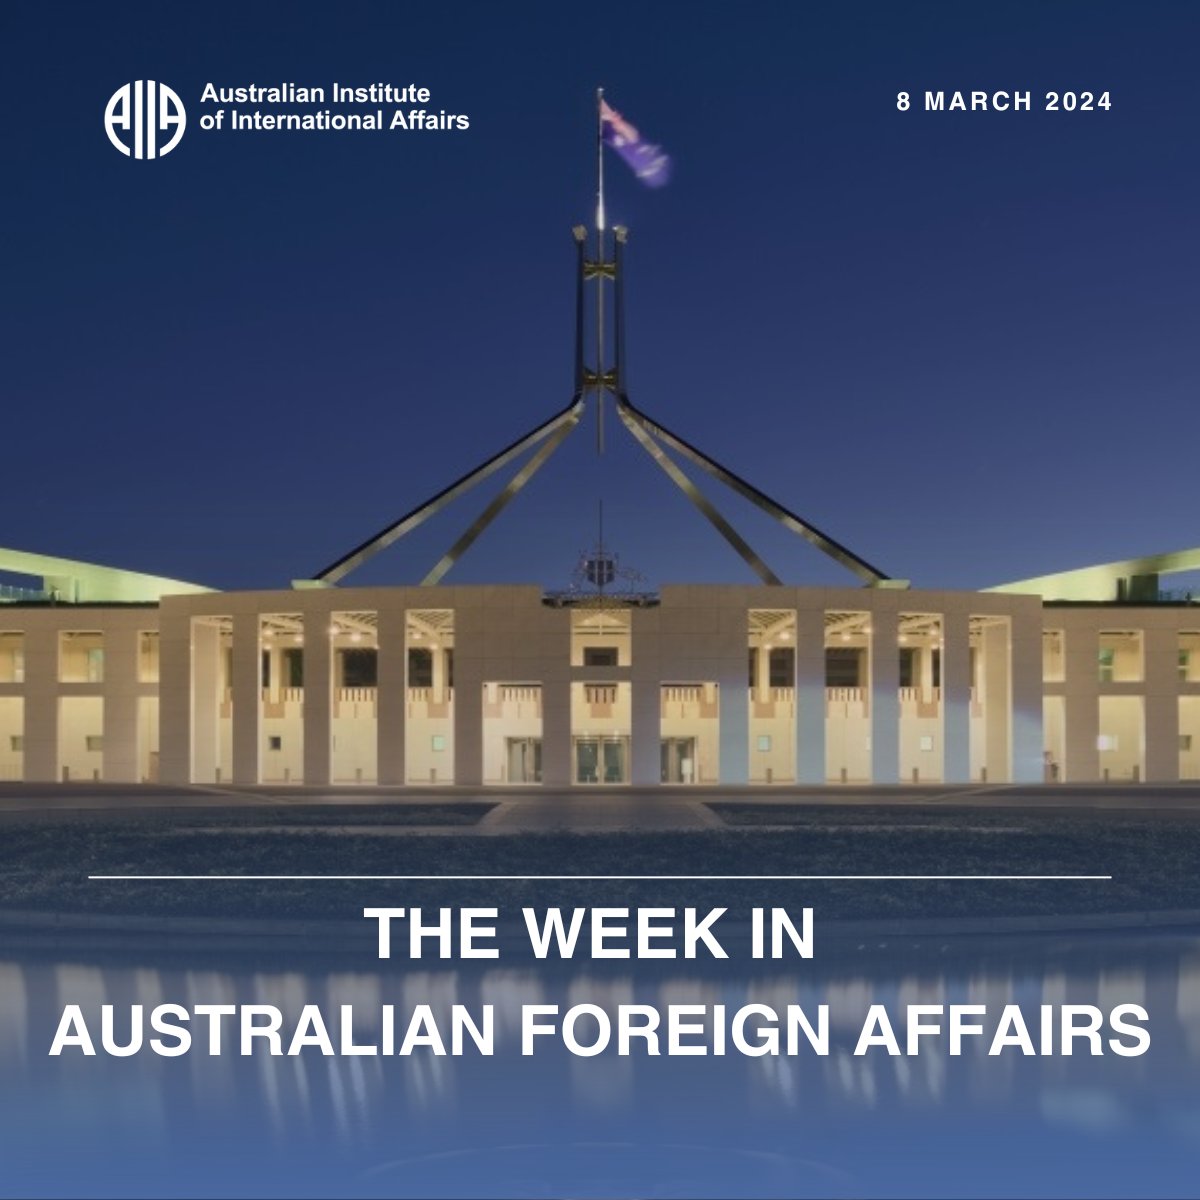 8 March 2024: “ASEAN-Australia Special Summit; Australia and Vietnam strategic partnership; investment platforms for Southeast Asia; Australia and Malaysia Leaders’ Meeting,” by Adam Bartely Read more at The Week in Australian Foreign Affairs👇 ow.ly/JcXC50QROtV